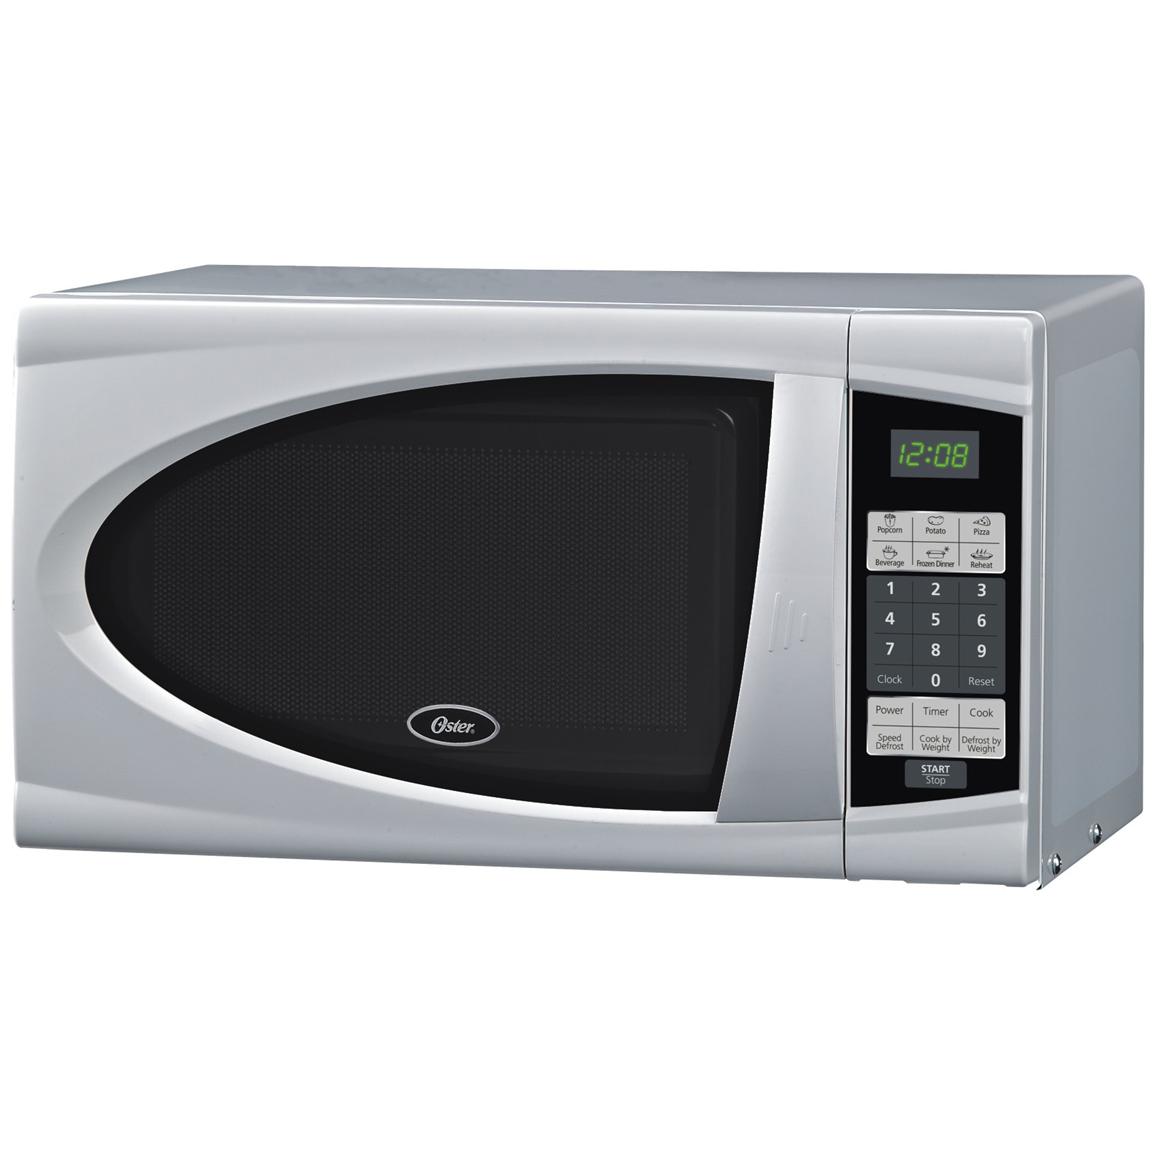 Oster 0 7 Cu Ft Digital Microwave Oven White 297402 Kitchen